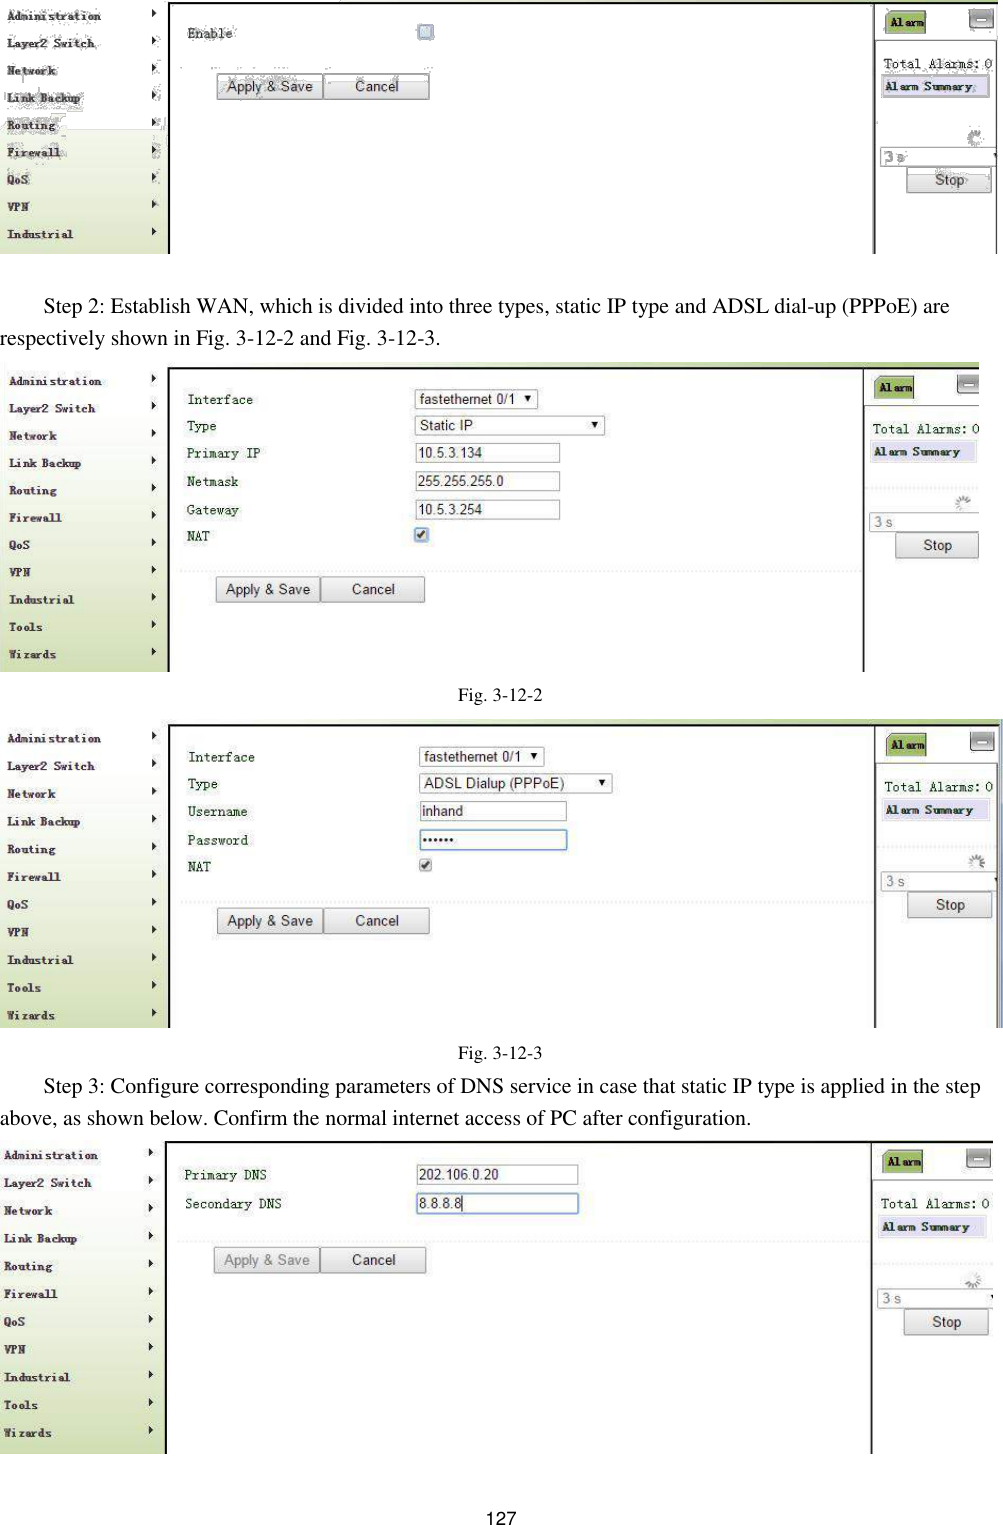             Step 2: Establish WAN, which is divided into three types, static IP type and ADSL dial-up (PPPoE) are respectively shown in Fig. 3-12-2 and Fig. 3-12-3.                Fig. 3-12-2                 Fig. 3-12-3  Step 3: Configure corresponding parameters of DNS service in case that static IP type is applied in the step above, as shown below. Confirm the normal internet access of PC after configuration.                  127 